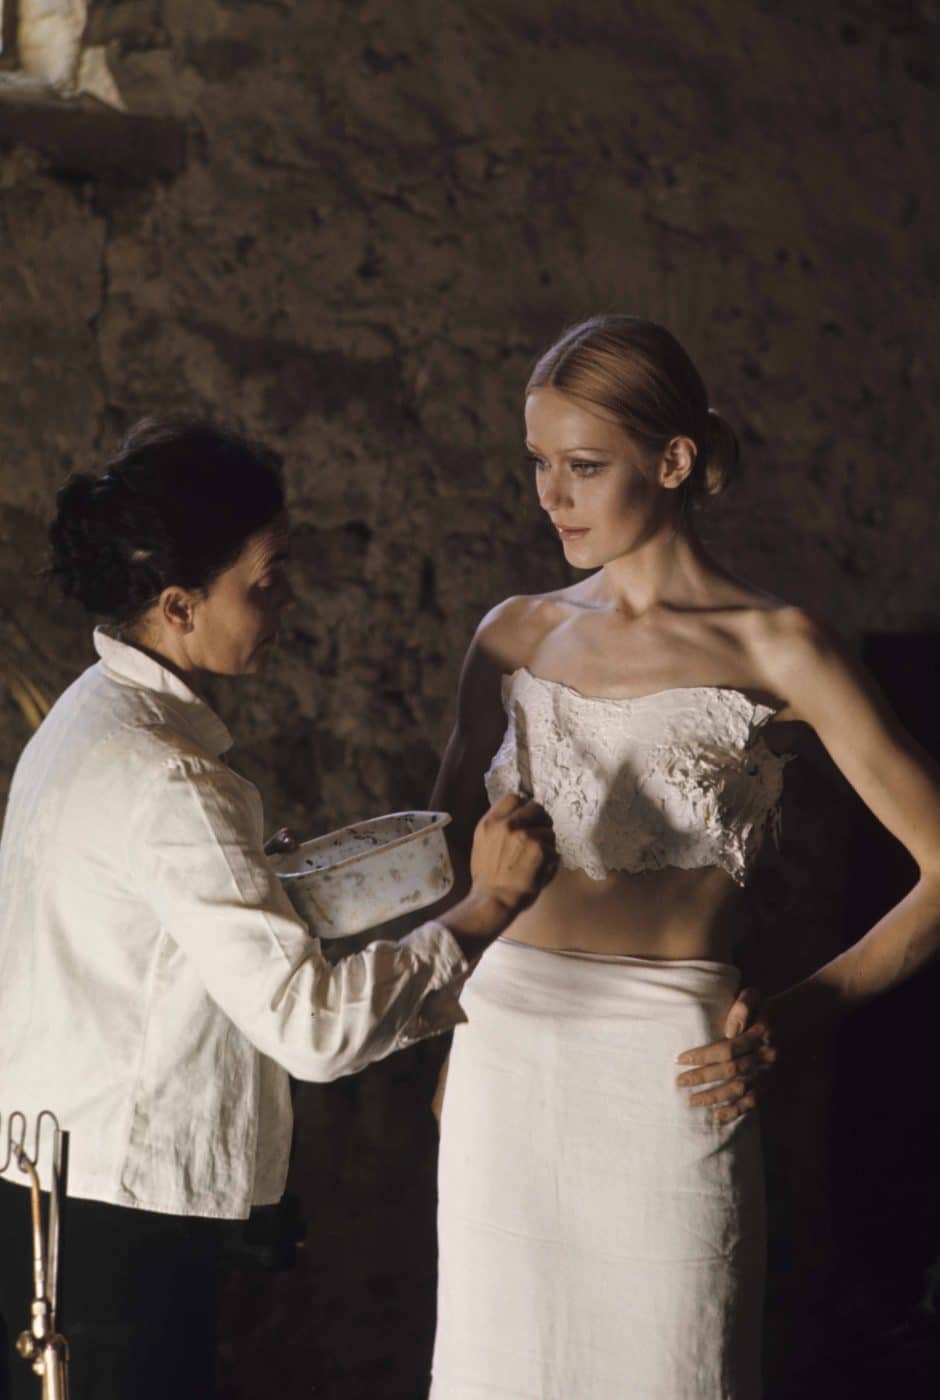 French artist and designer Claude Lalanne creating a plaster cast of a model's torso in order to create a golden body sculpture for Yves Saint Laurent's 1969 fall/winter haute couture collection Assouline book Lalanne: A World of Poetry